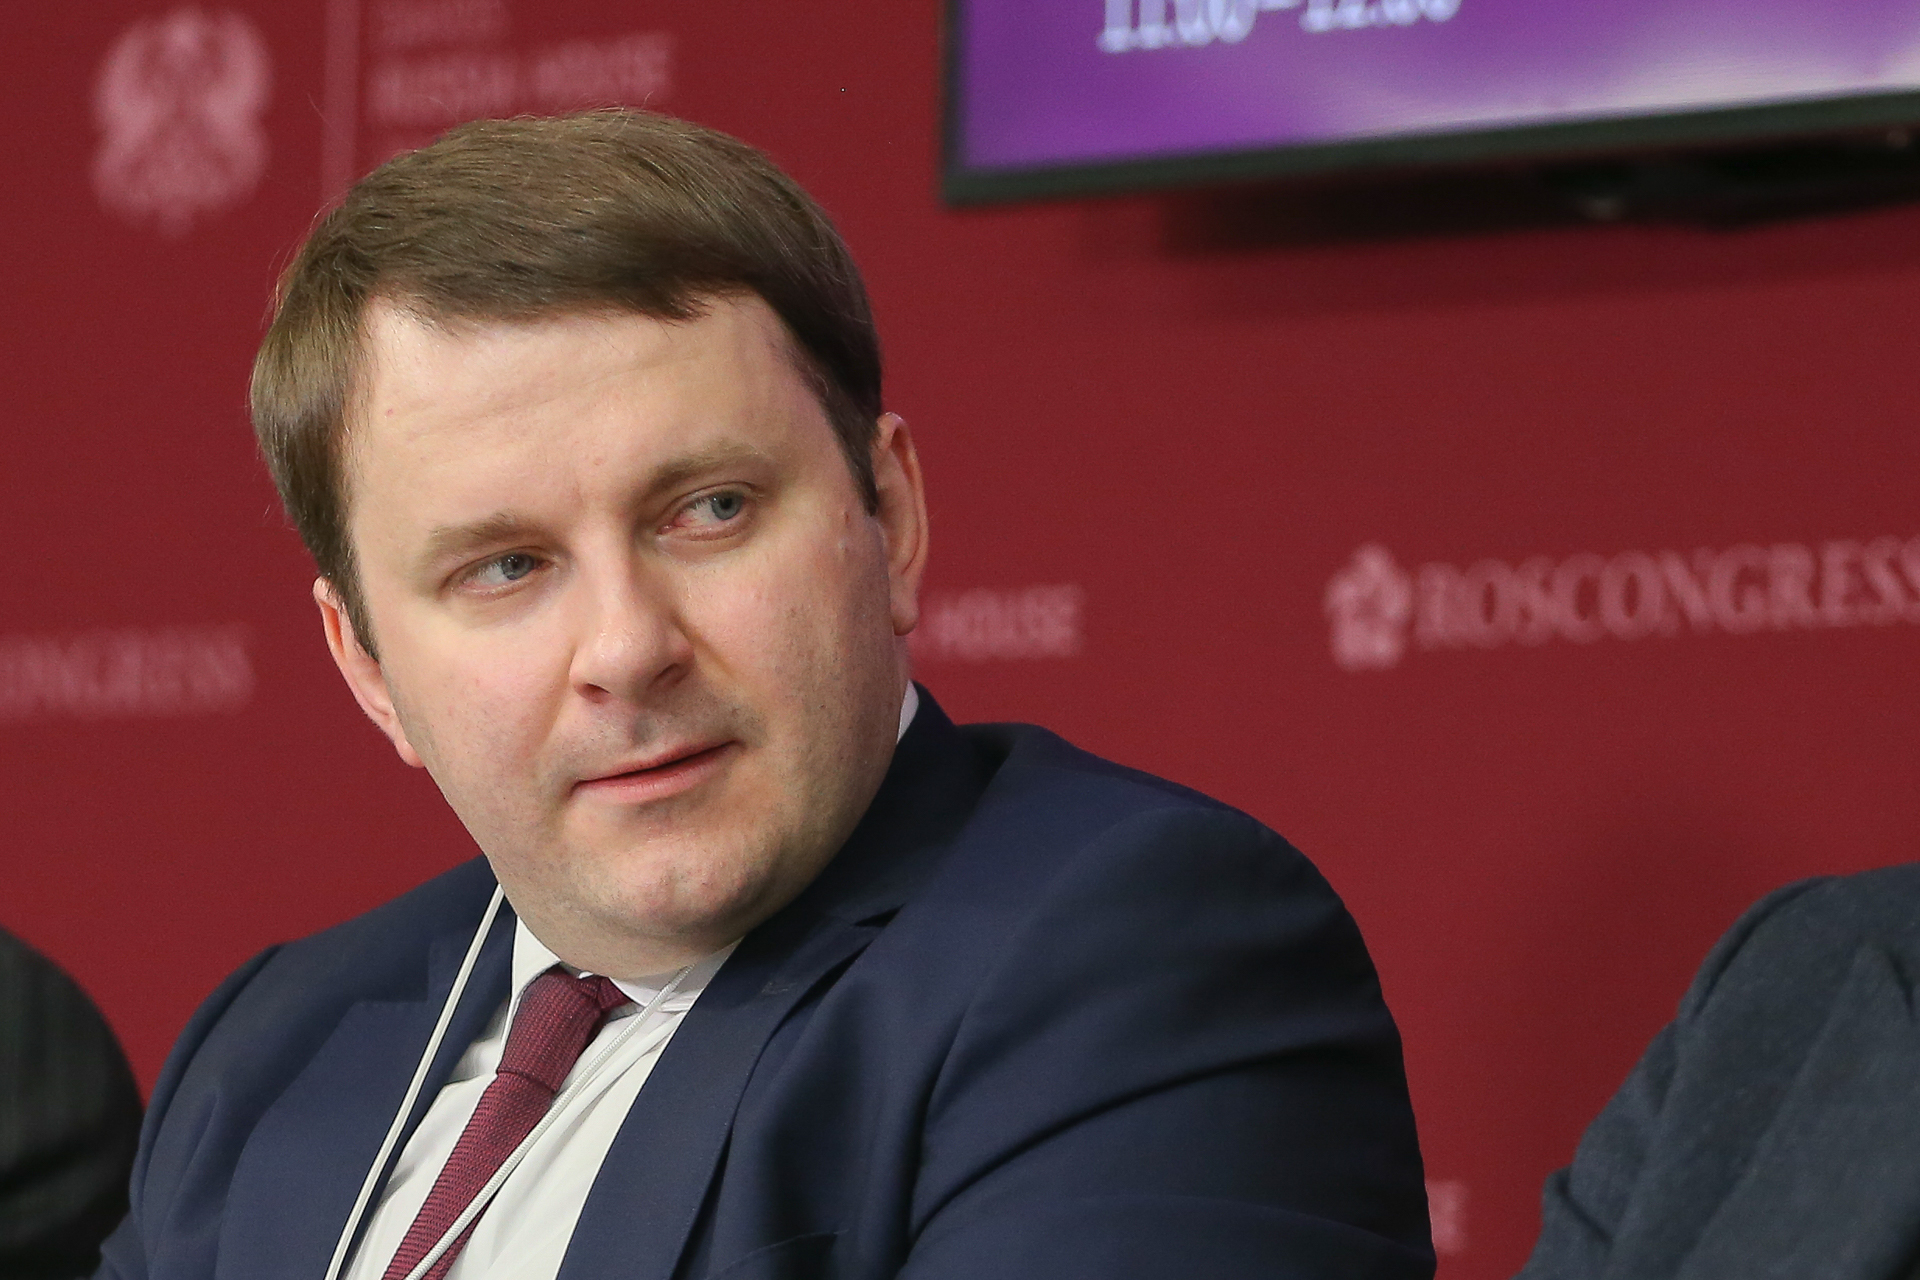 Minister of Economic Development of the Russian Federation Maksim Oreshkin tells of improvements in the Russian investment climate at Russia House in Davos